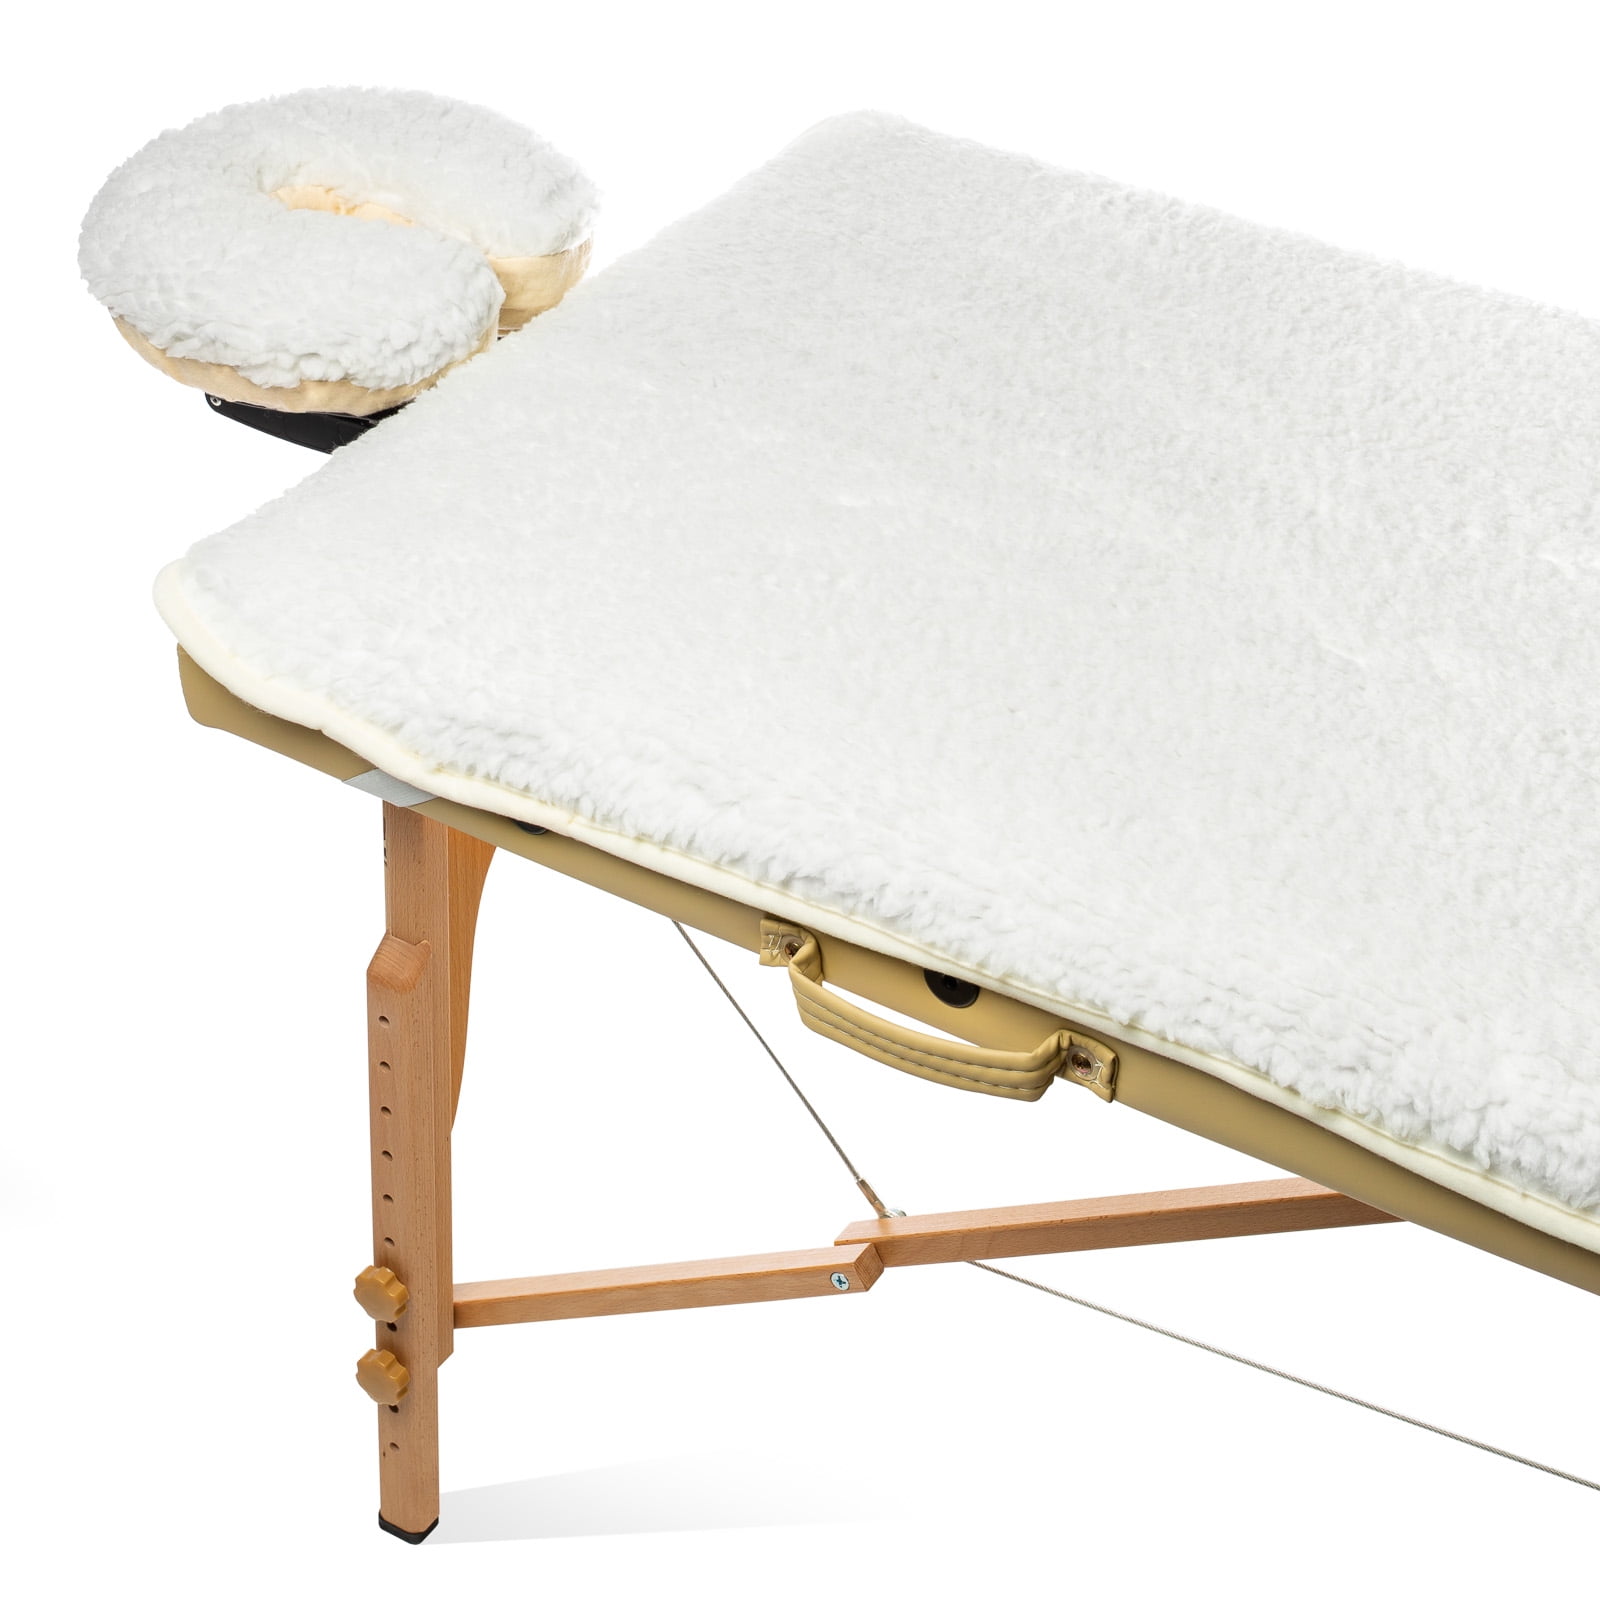 Saloniture Fleece Massage Table Pad & Face Cradle Set - Soft and  Comfortable 1/2 Thick Facial Bed and Headrest Cover - Natural 